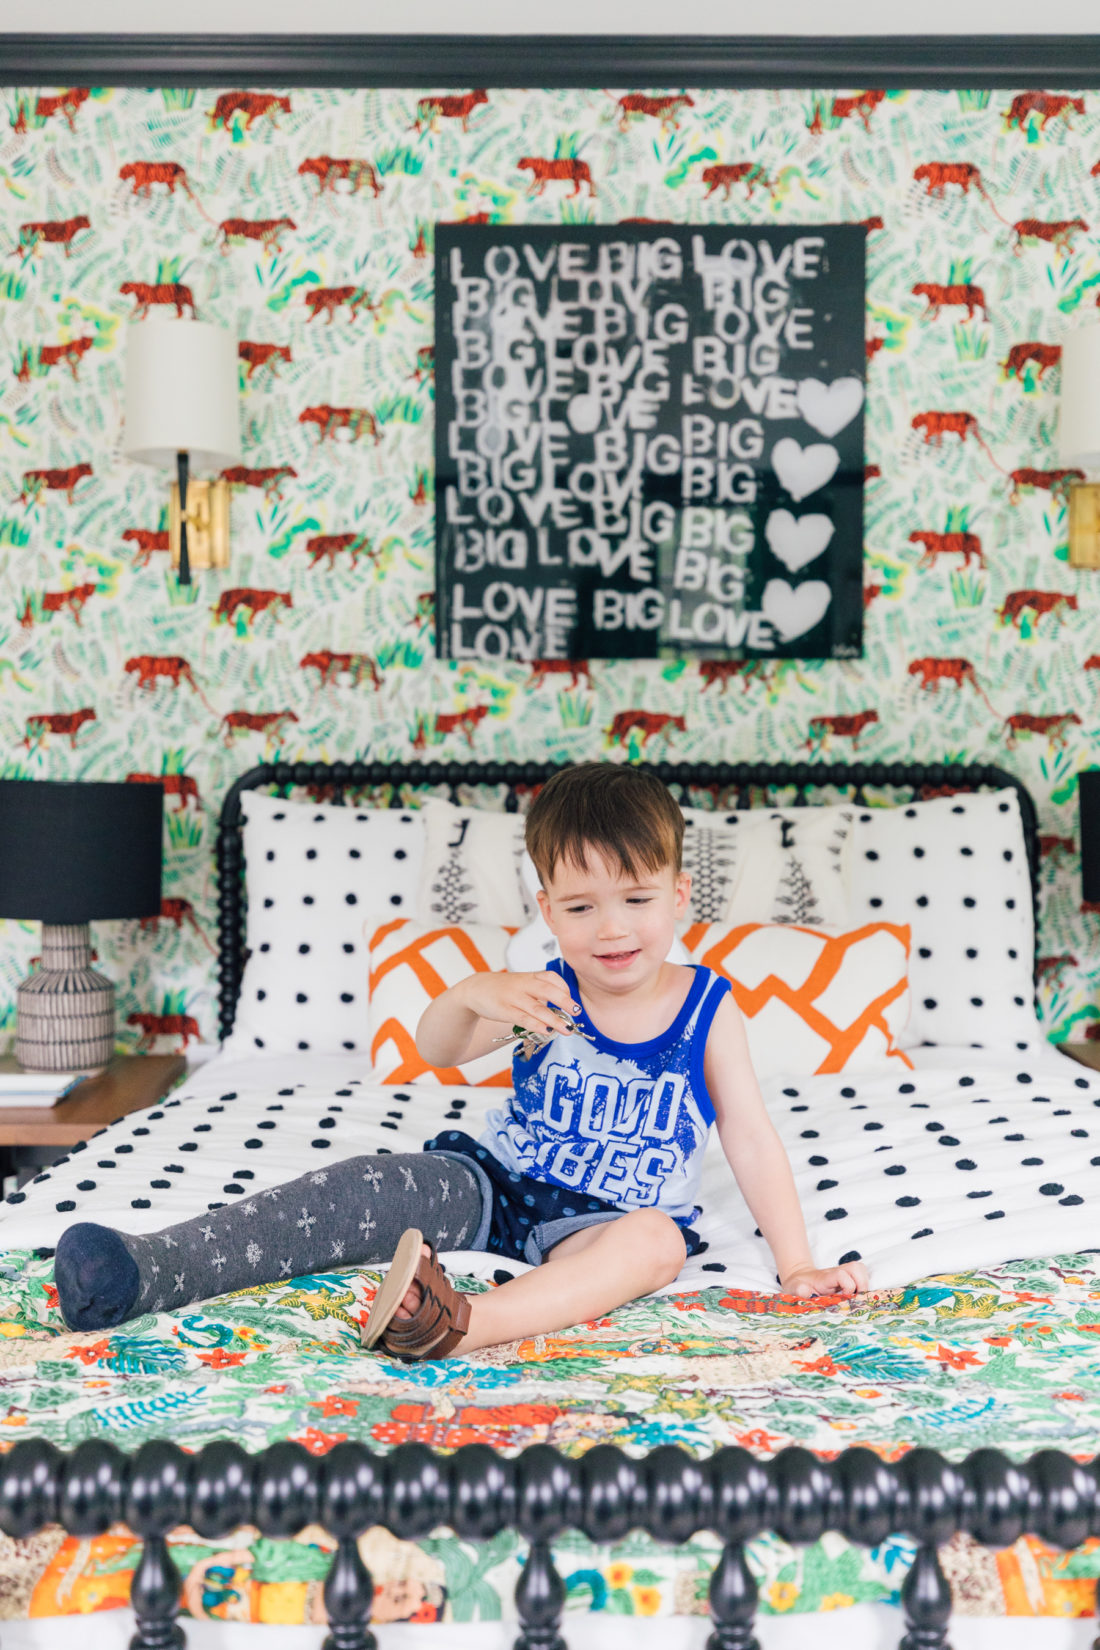 Eva Amurri Martino's son Major sits on his colorful bed in his new bedroom beneath a Kerri Rosenthal print